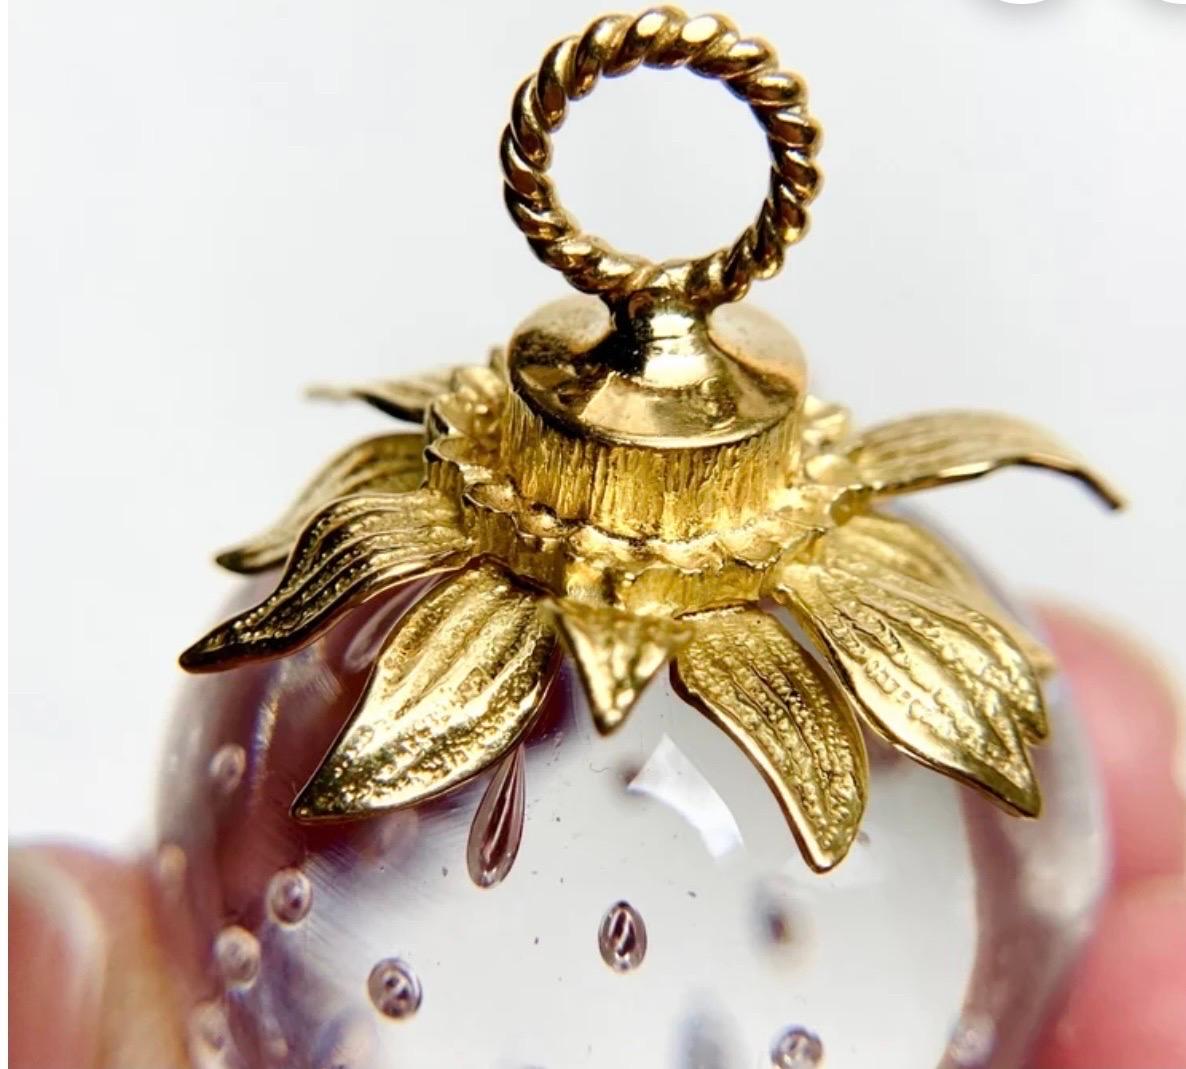 
Designer Steuben crystal 
 For your consideration, a fabulous vintage 18K yellow gold fitted Steuben glass strawberry pendant. The piece is Amazing craft 
 The pendant is in Excellent condition
No chips or cracks, Hallmarked 18K under one leaf. The